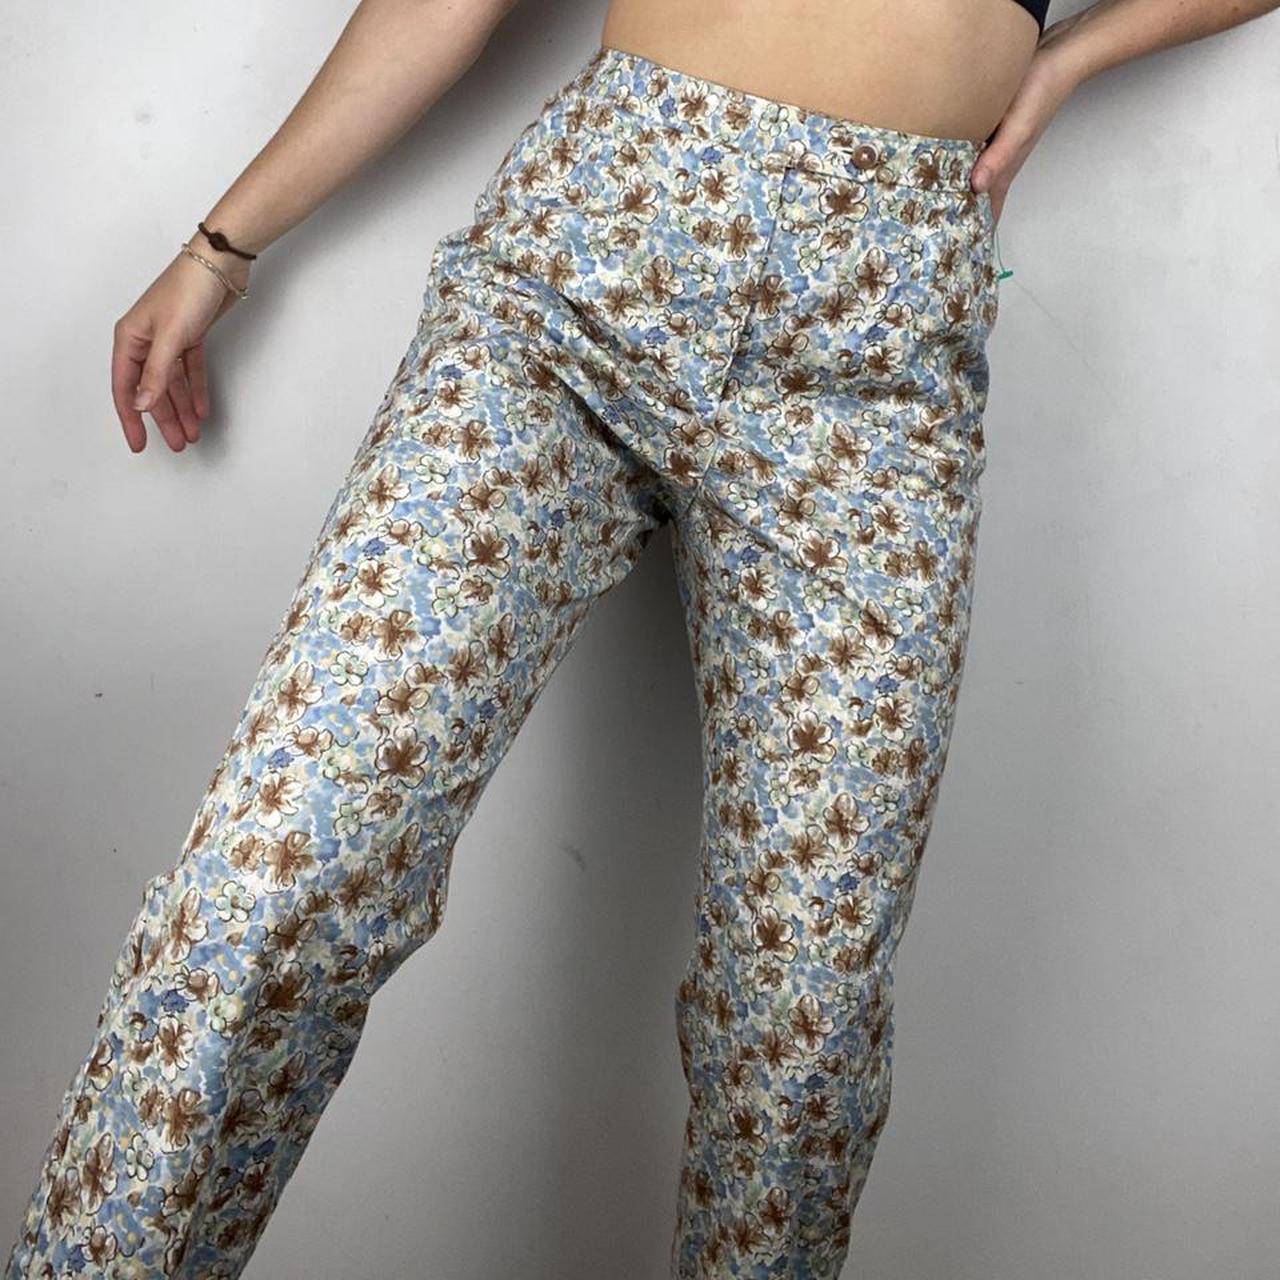 Product Image 1 - Vintage High Waisted Patterned Pants🪐
These